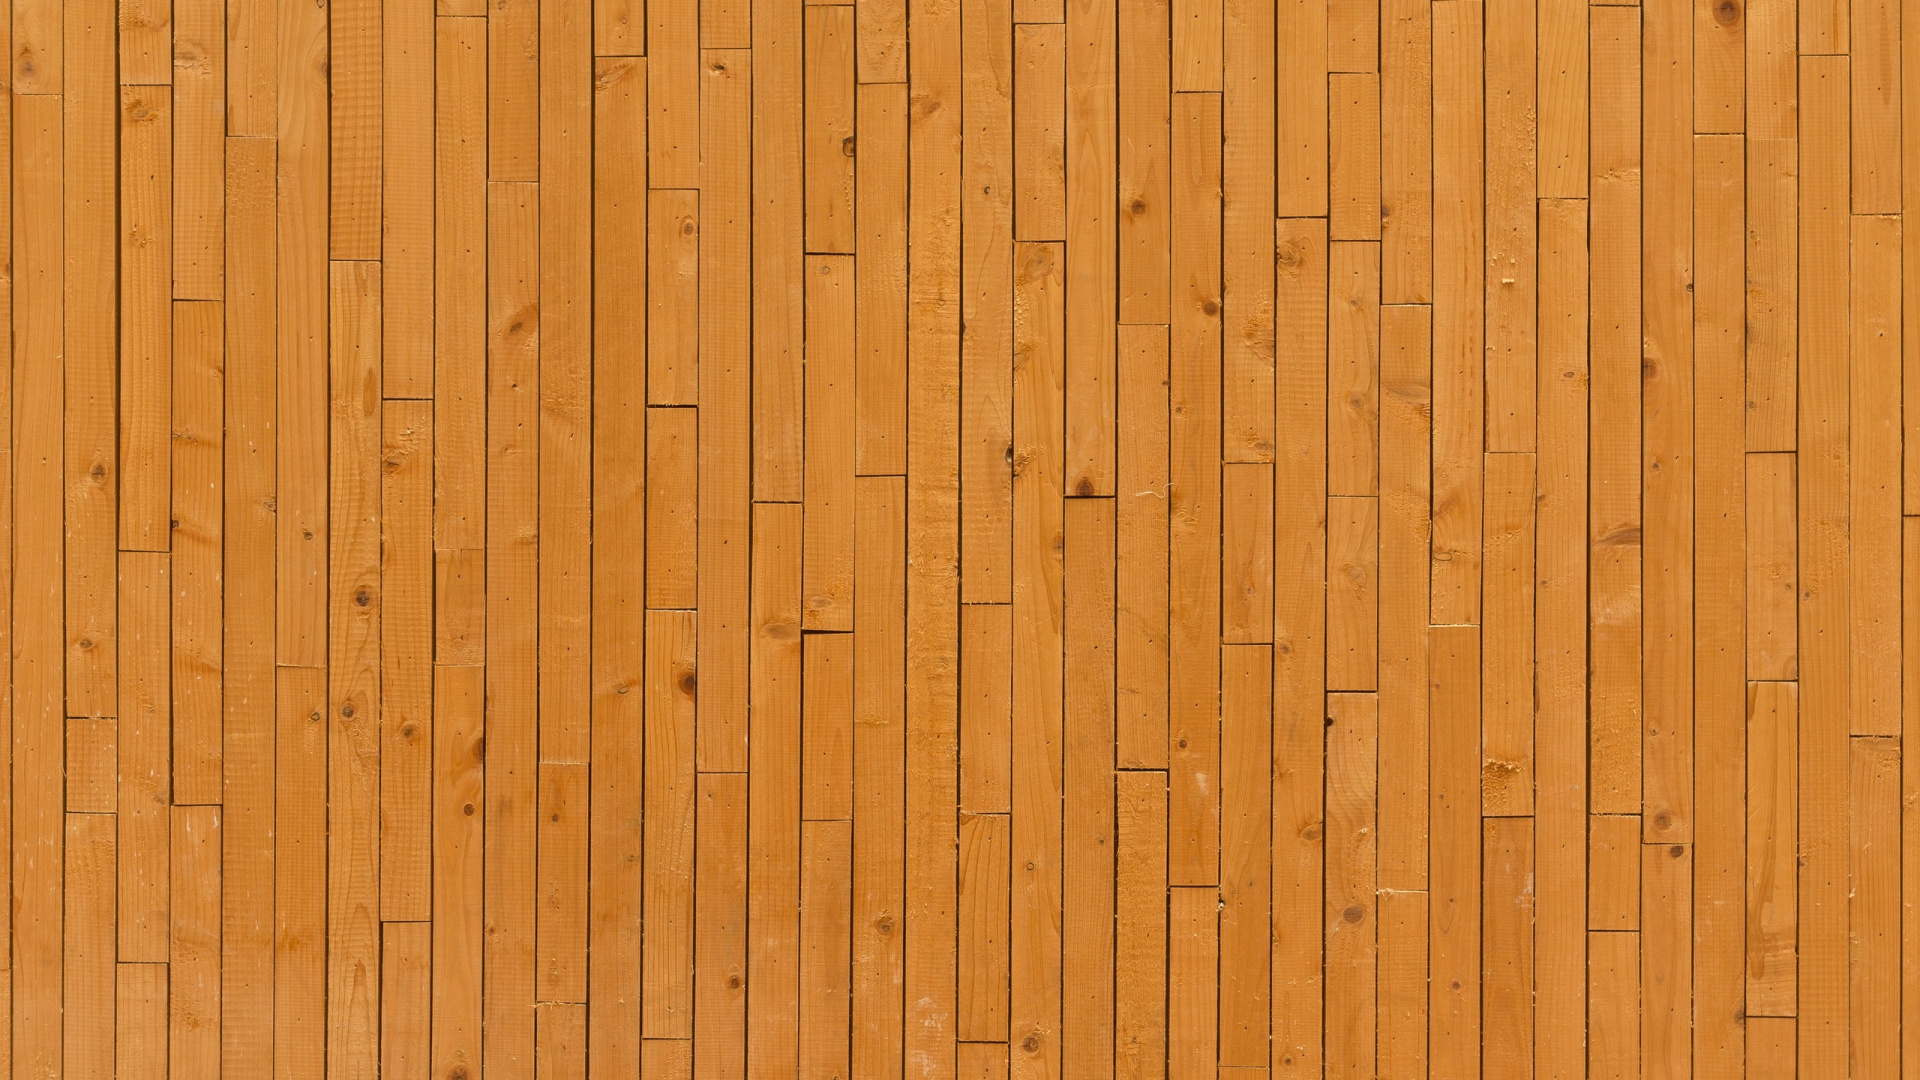 Brown Wooden Wall During Daytime. Wallpaper in 1920x1080 Resolution